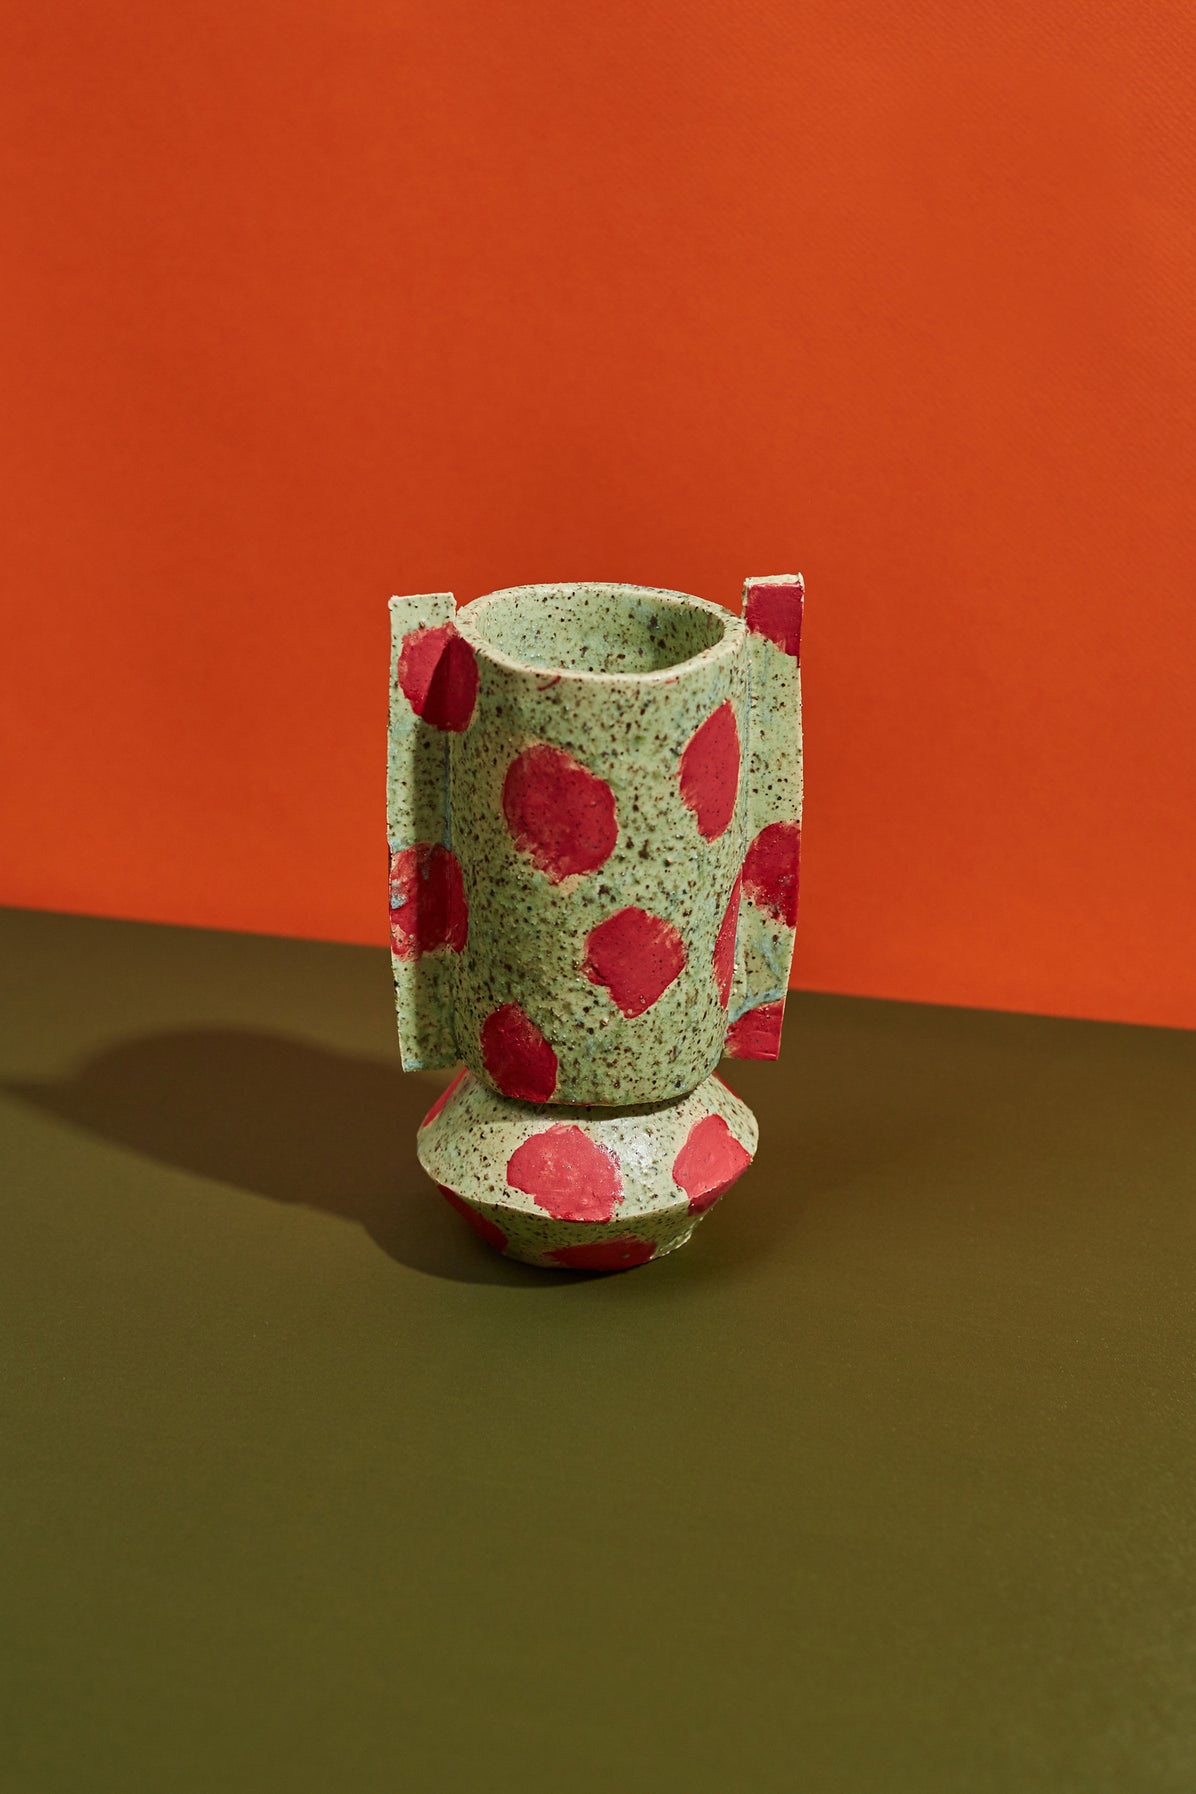 Magma Vase by Uoqaus